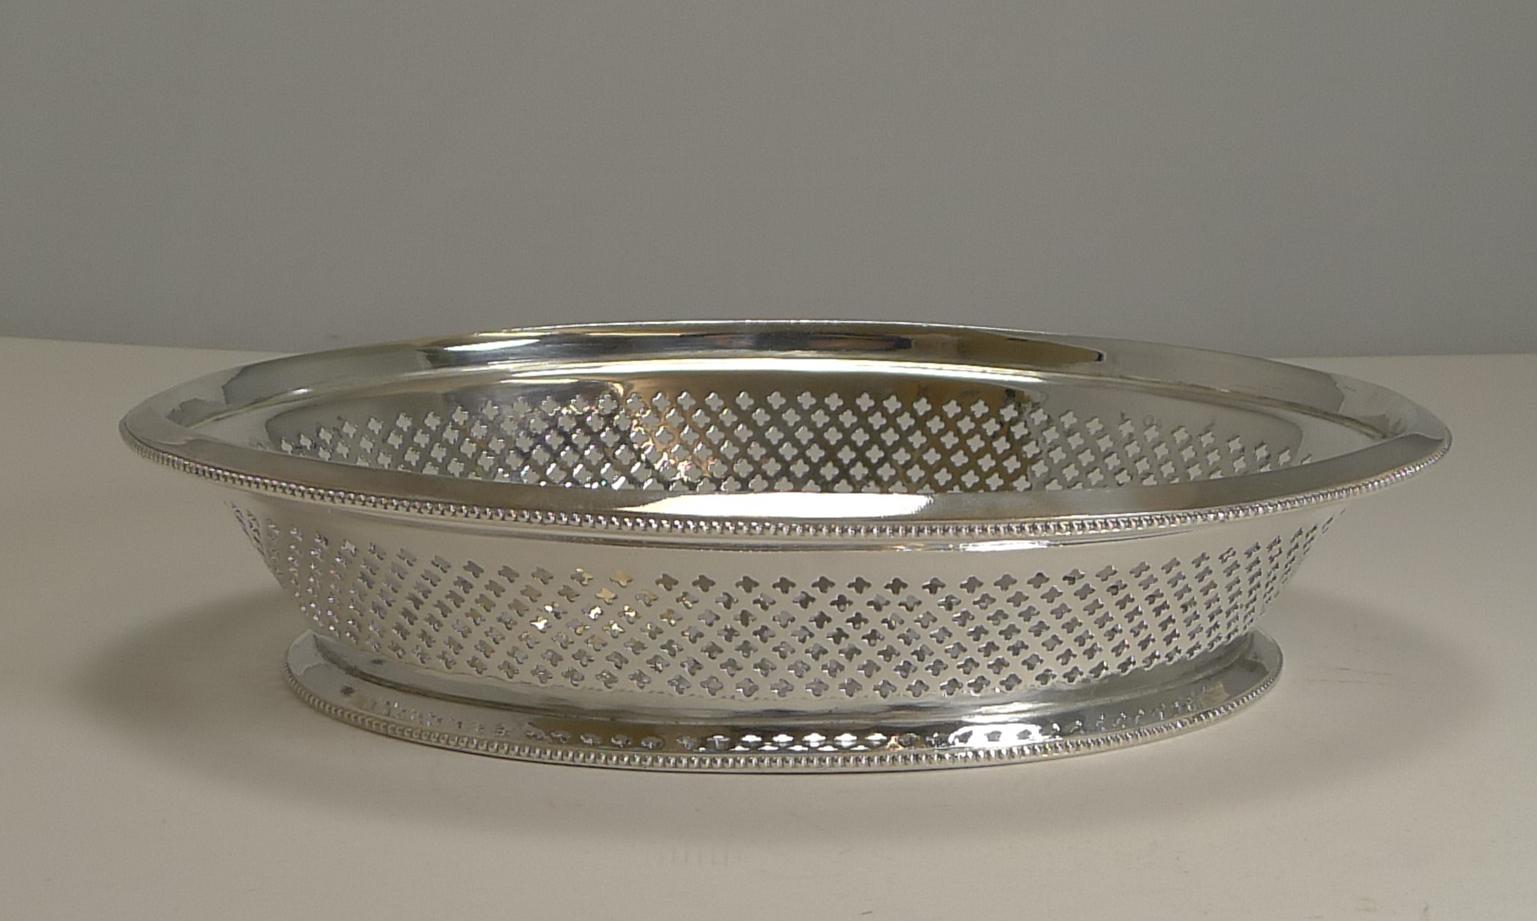 An elegant and very usable bread basket made in EPNS (Electro-Plated Nickel Silver) made by the very famous silversmiths, Atkin Brothers.

The sides of the basket has a series of pierced or reticulated quatrefoil motifs.

The underside is fully